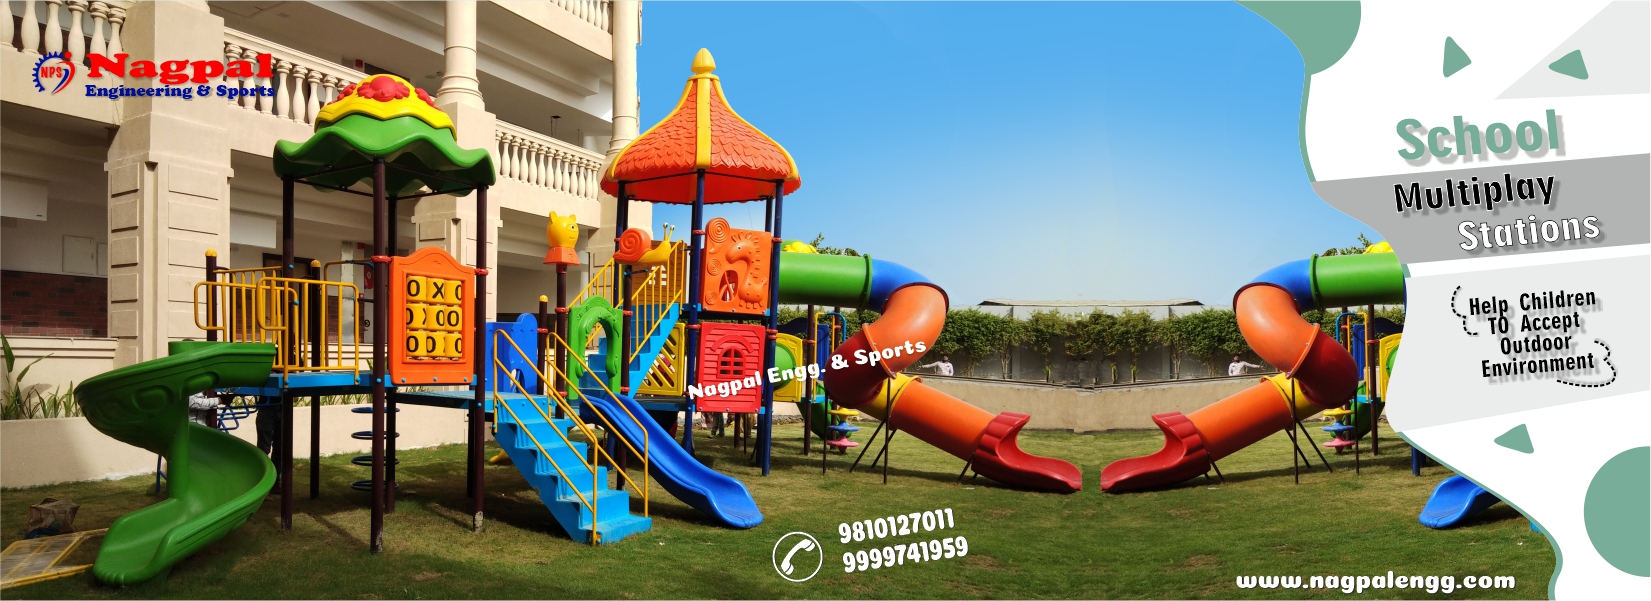 Roto Multiplay System Manufacturers, Exporters & Suppliers in Udaipur